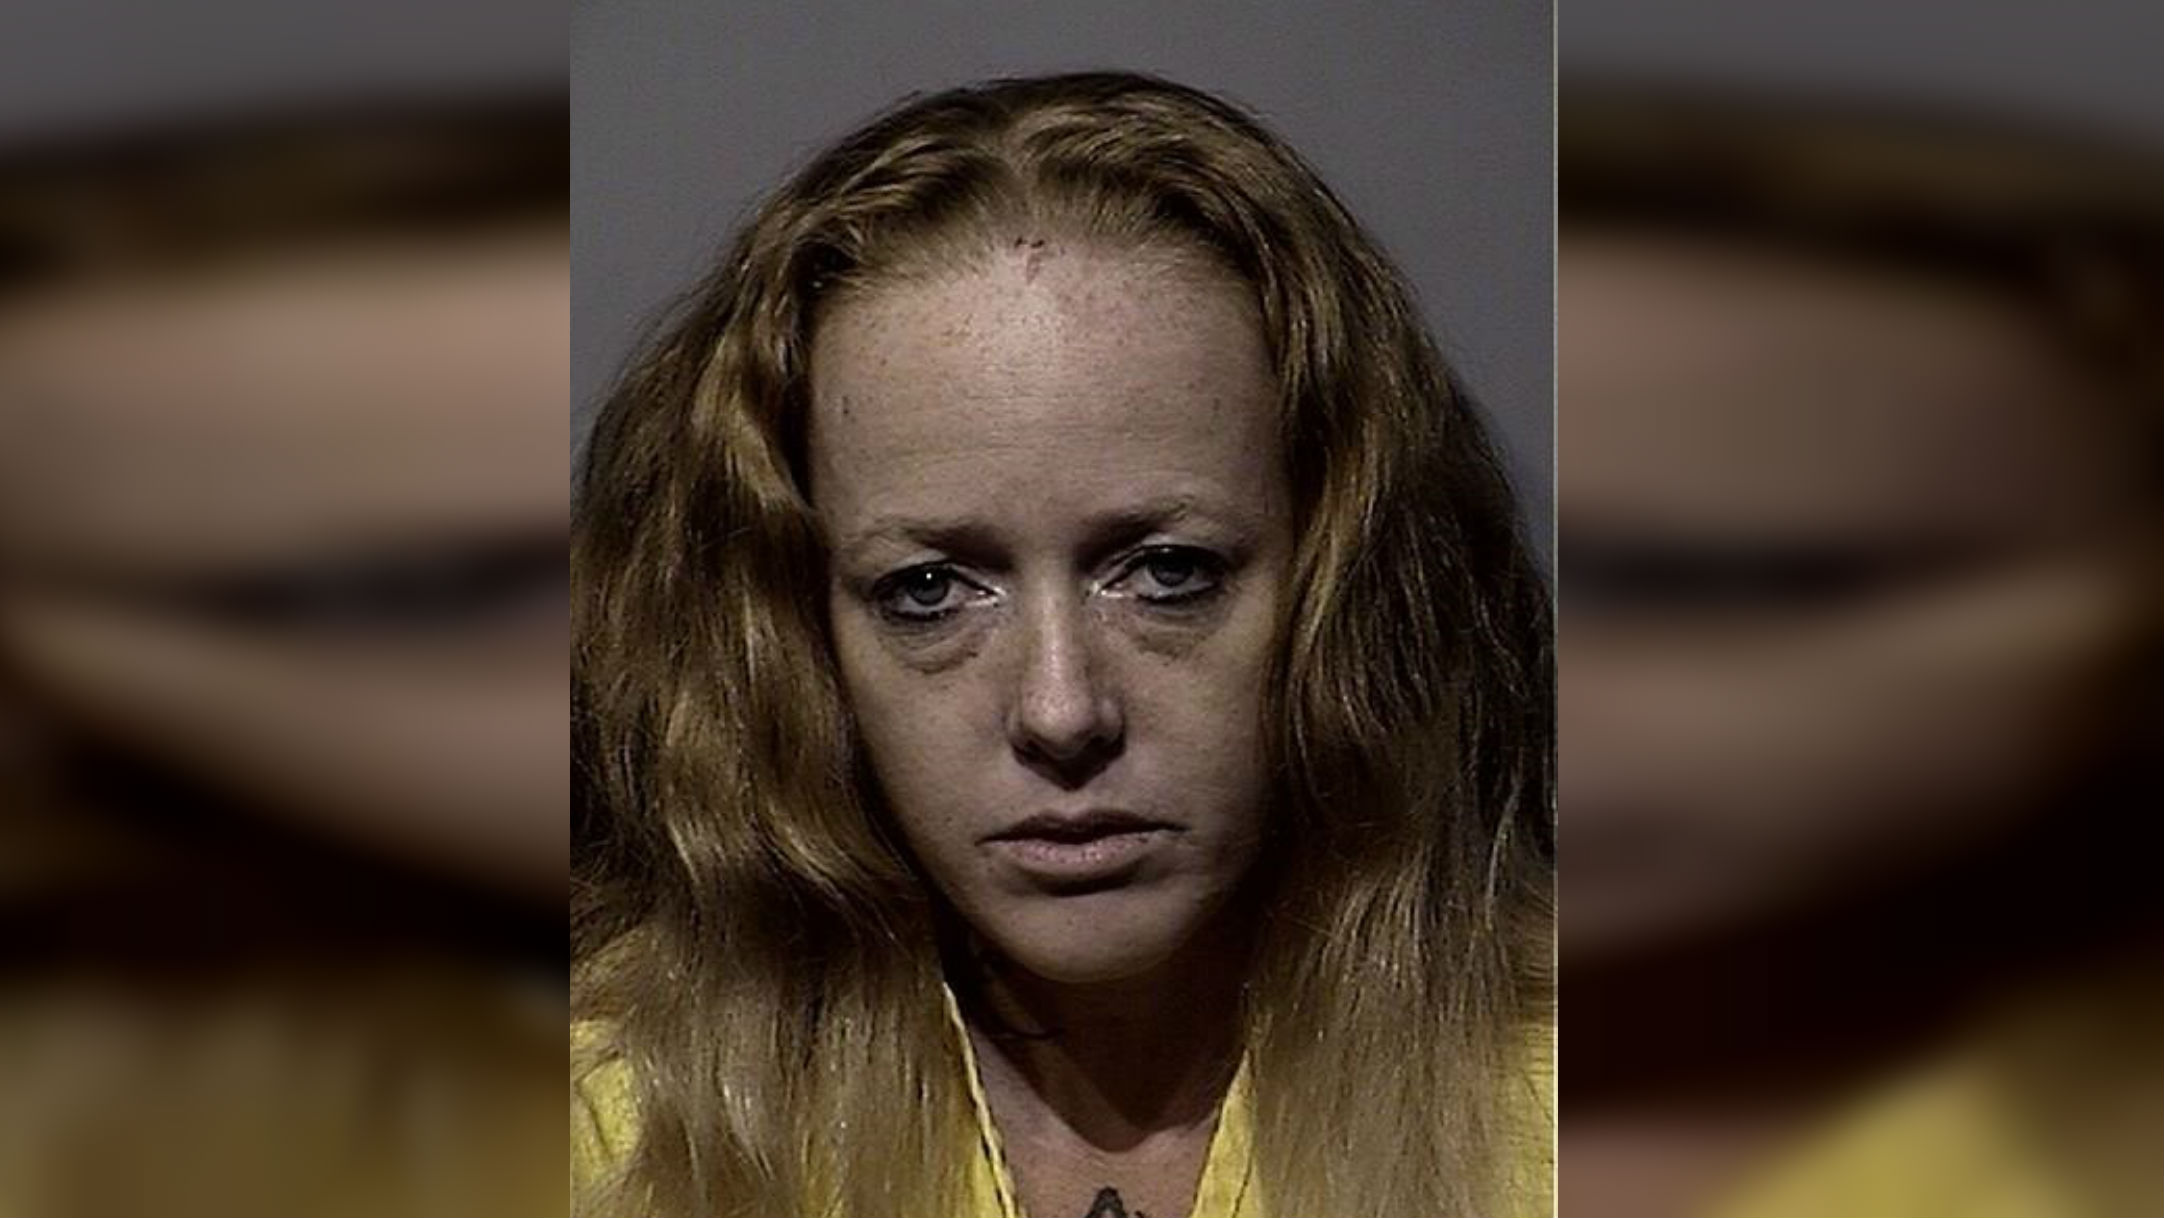 Coeur Dalene Woman Arrested For Attempted Murder Spokane North Idaho News And Weather 0347